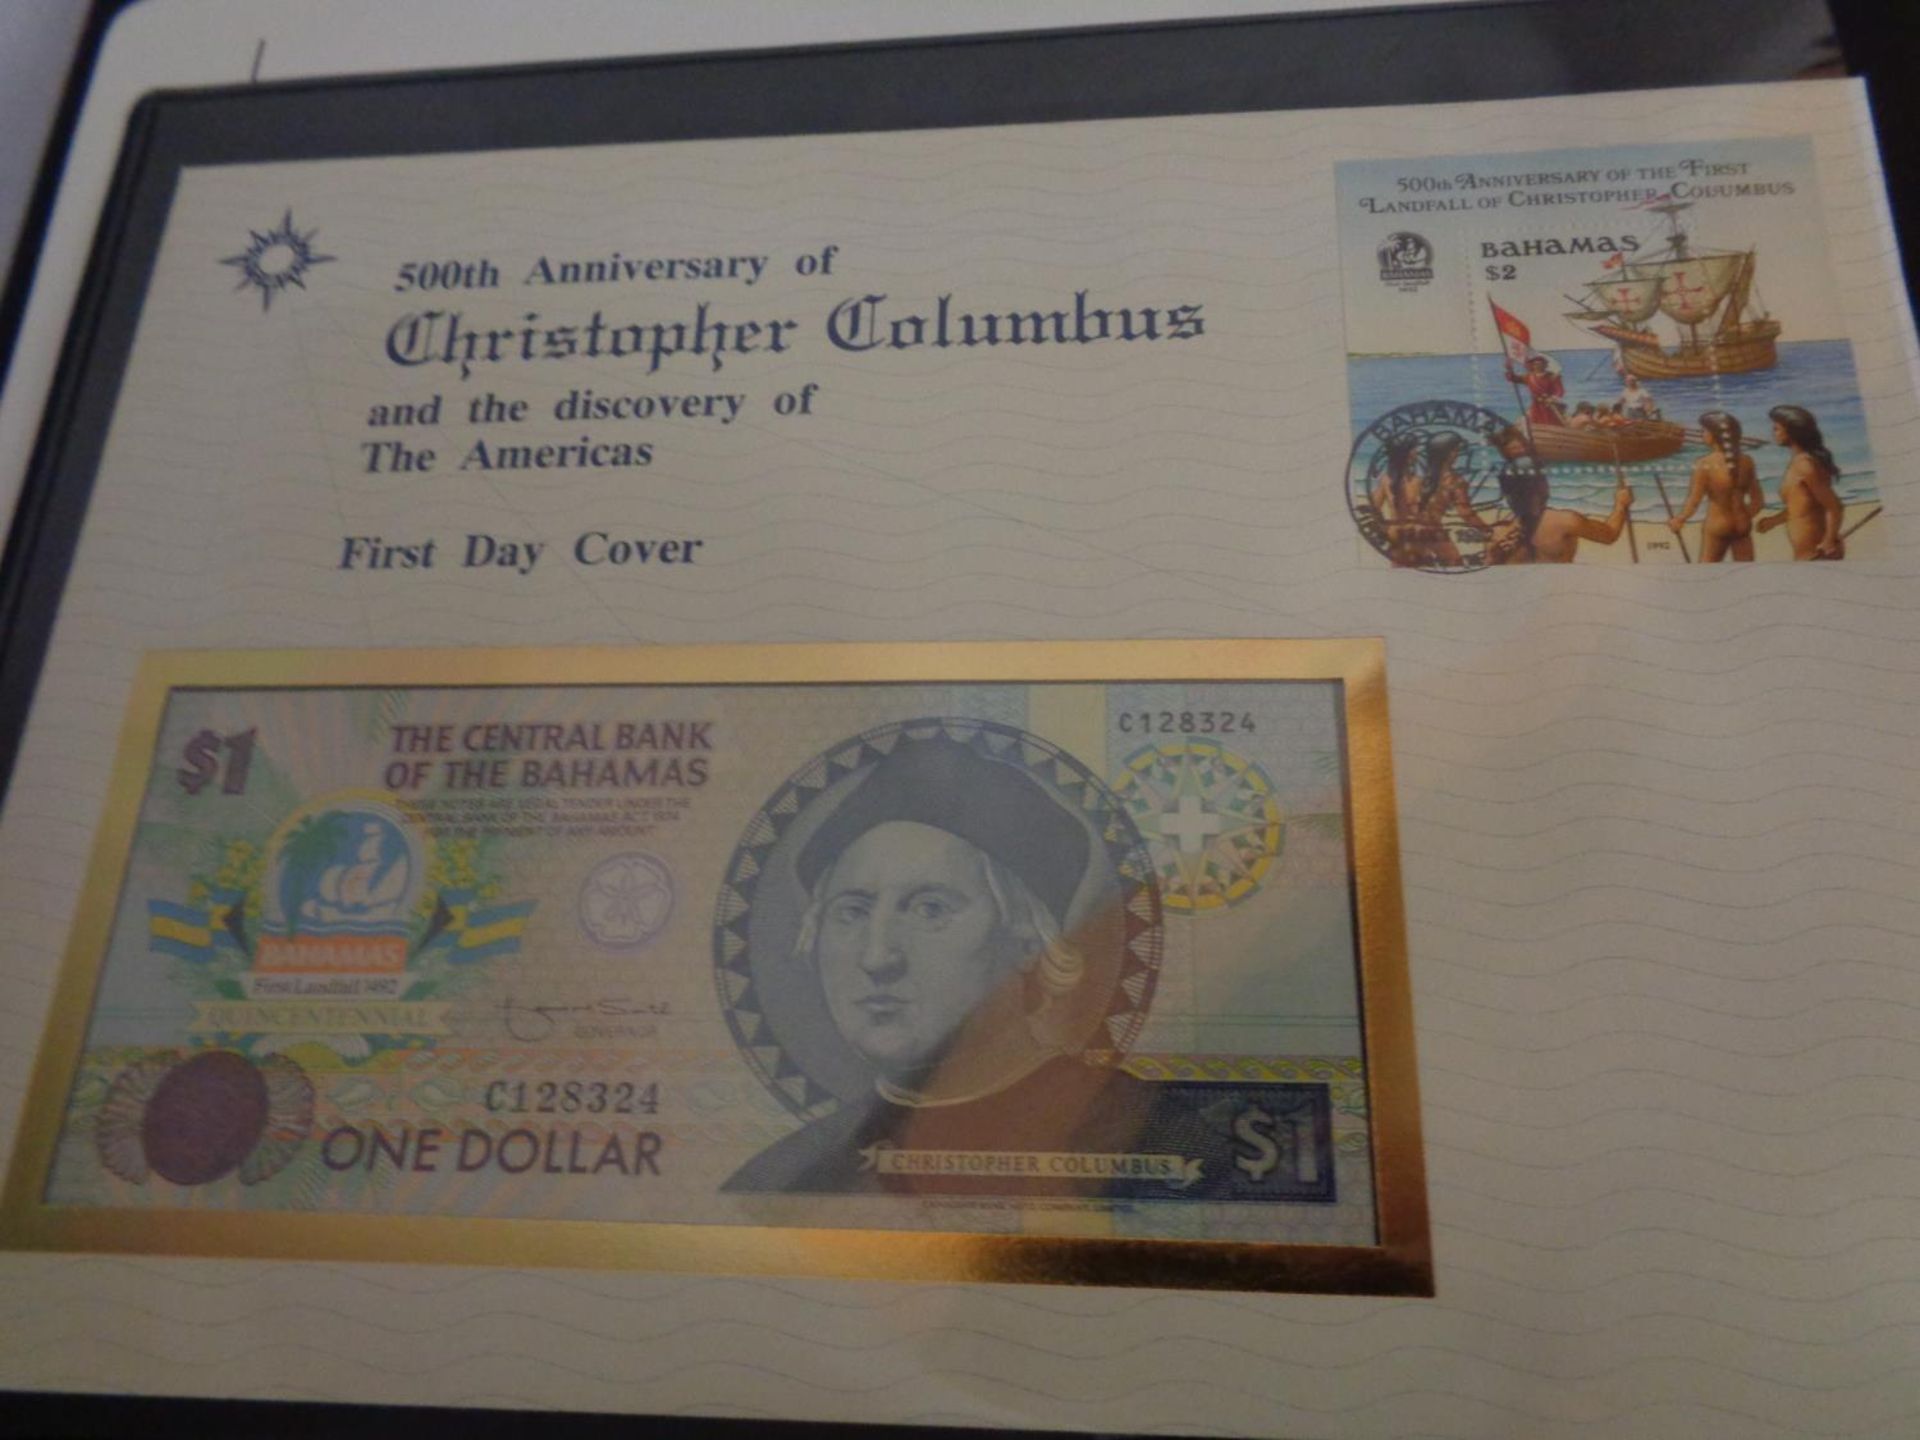 THE MARITIME COLLECTION OF STAMPS IN A BINDER , FEATURING CHRISTOPHER COLUMBUS . NOTED BANKNOTE - Image 5 of 8